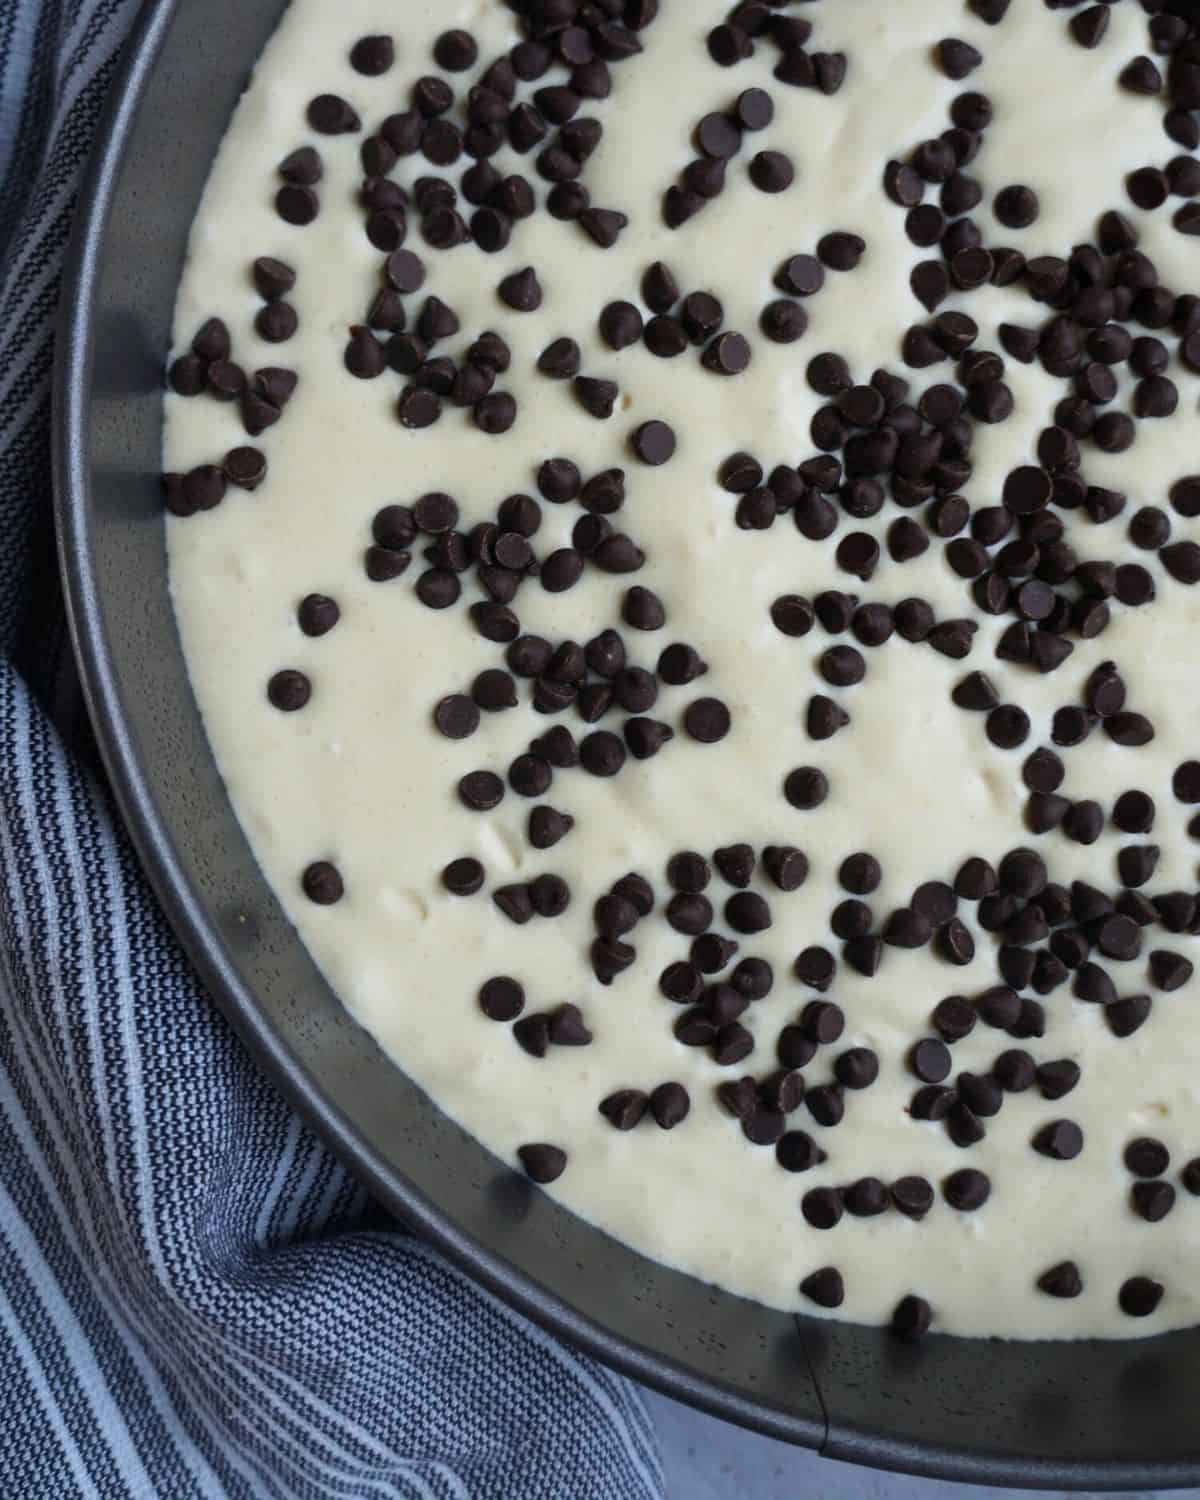 keto cheesecake filling in a pan before baking with chocolate chips sprinkled over top